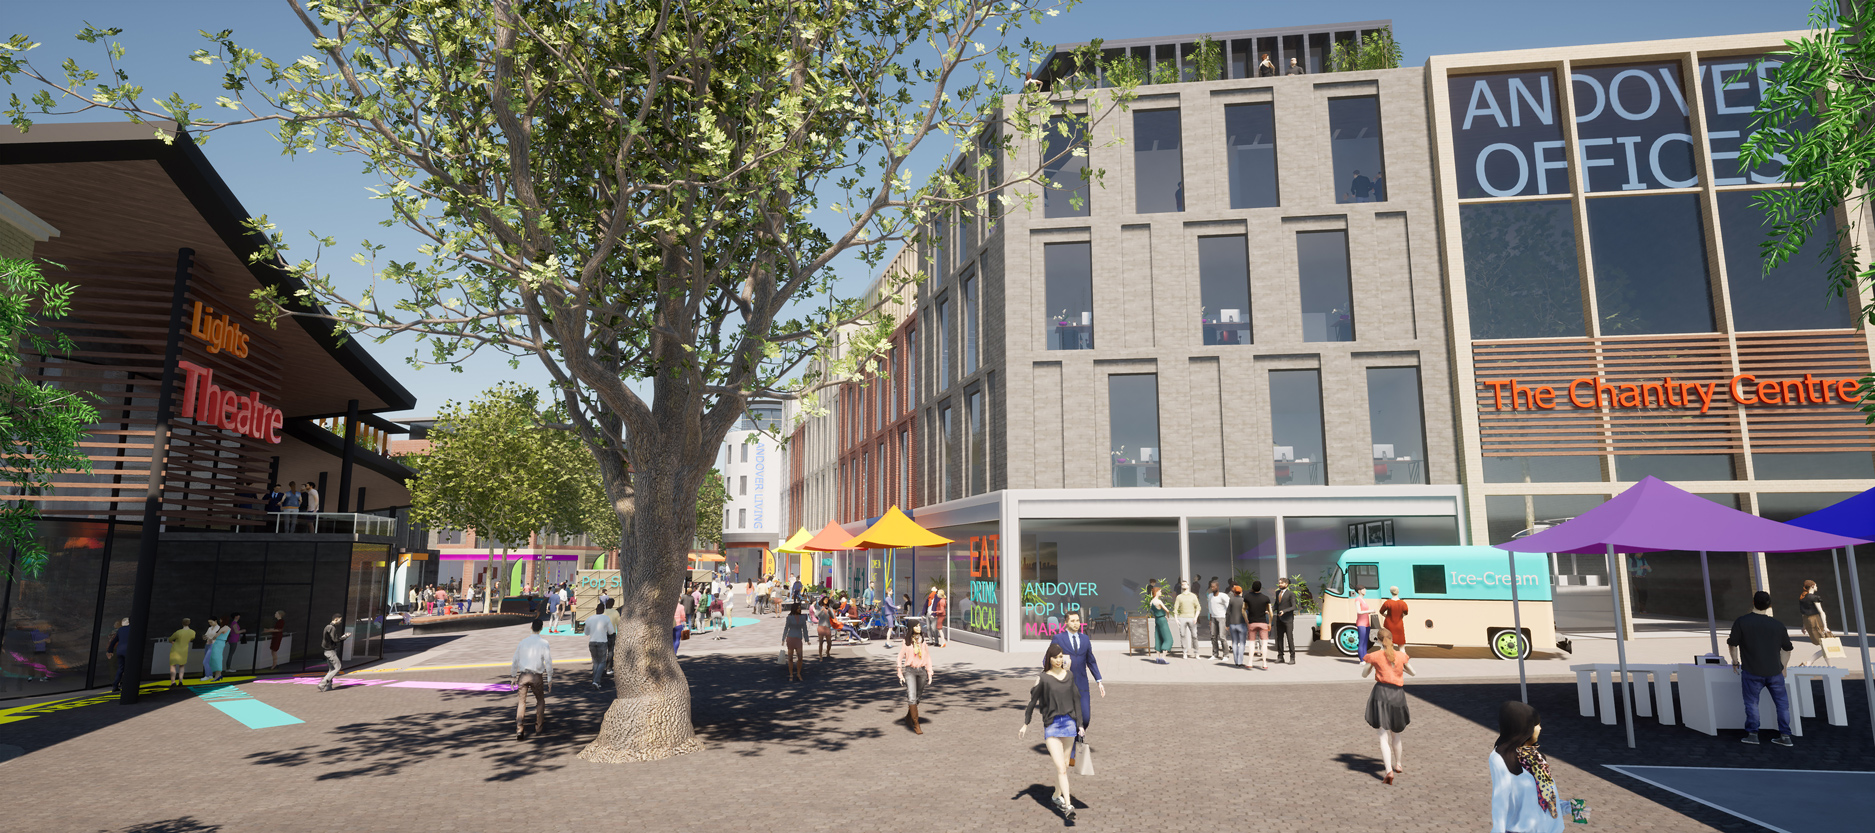 Replacing the Chantry Centre allows for new streets and spaces including the new Lights Theatre, shops and restaurants with residential and office at upper levels to support